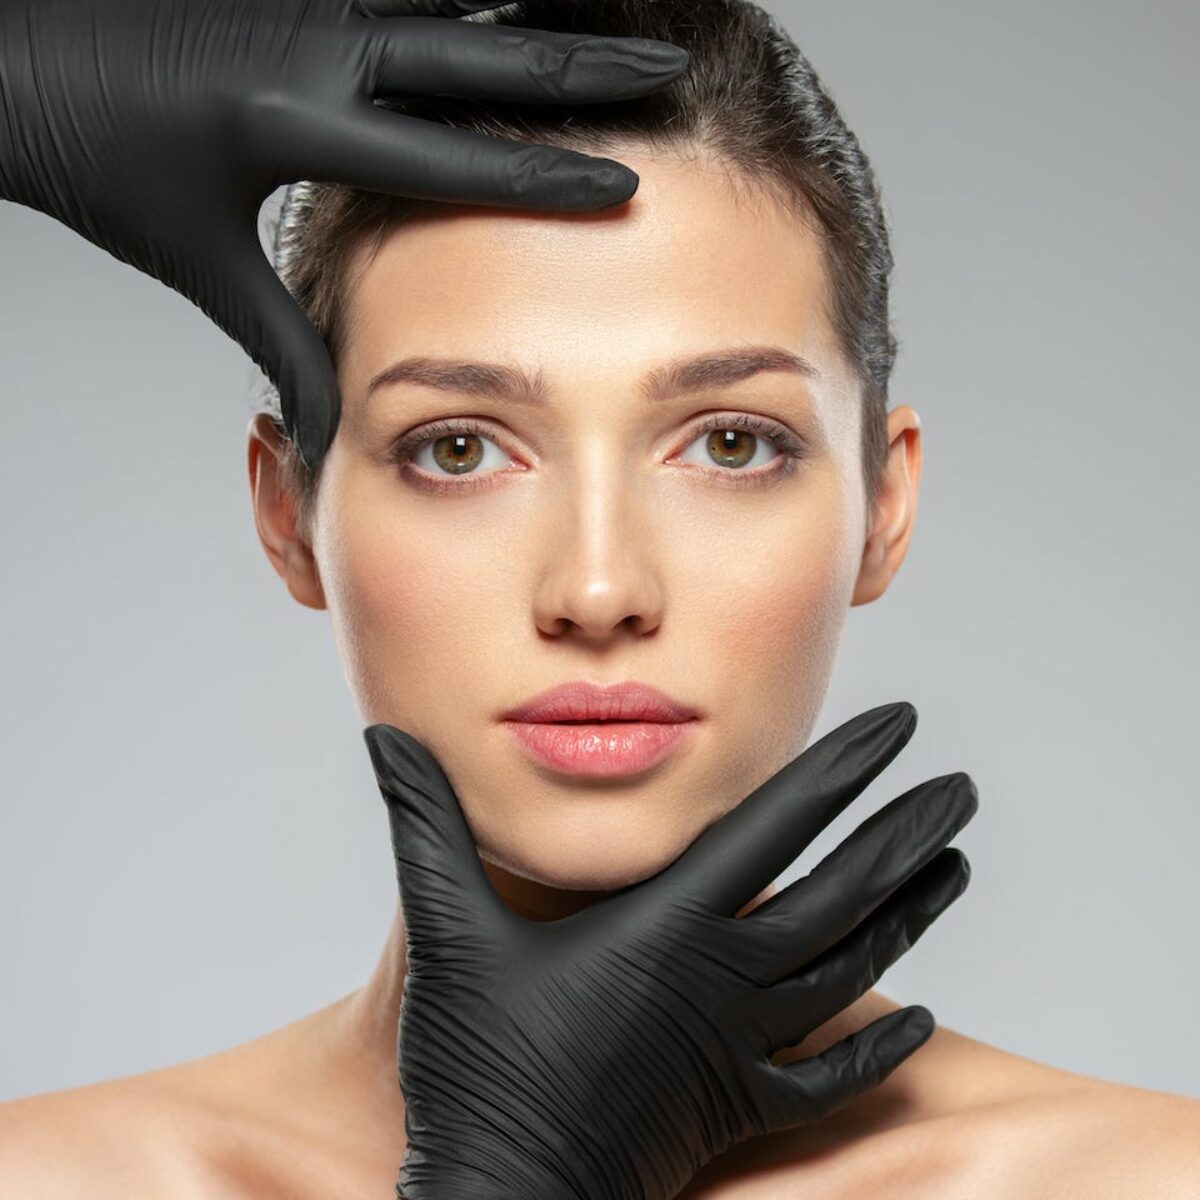 2021 Trends of Cosmetic Surgery - Vanity